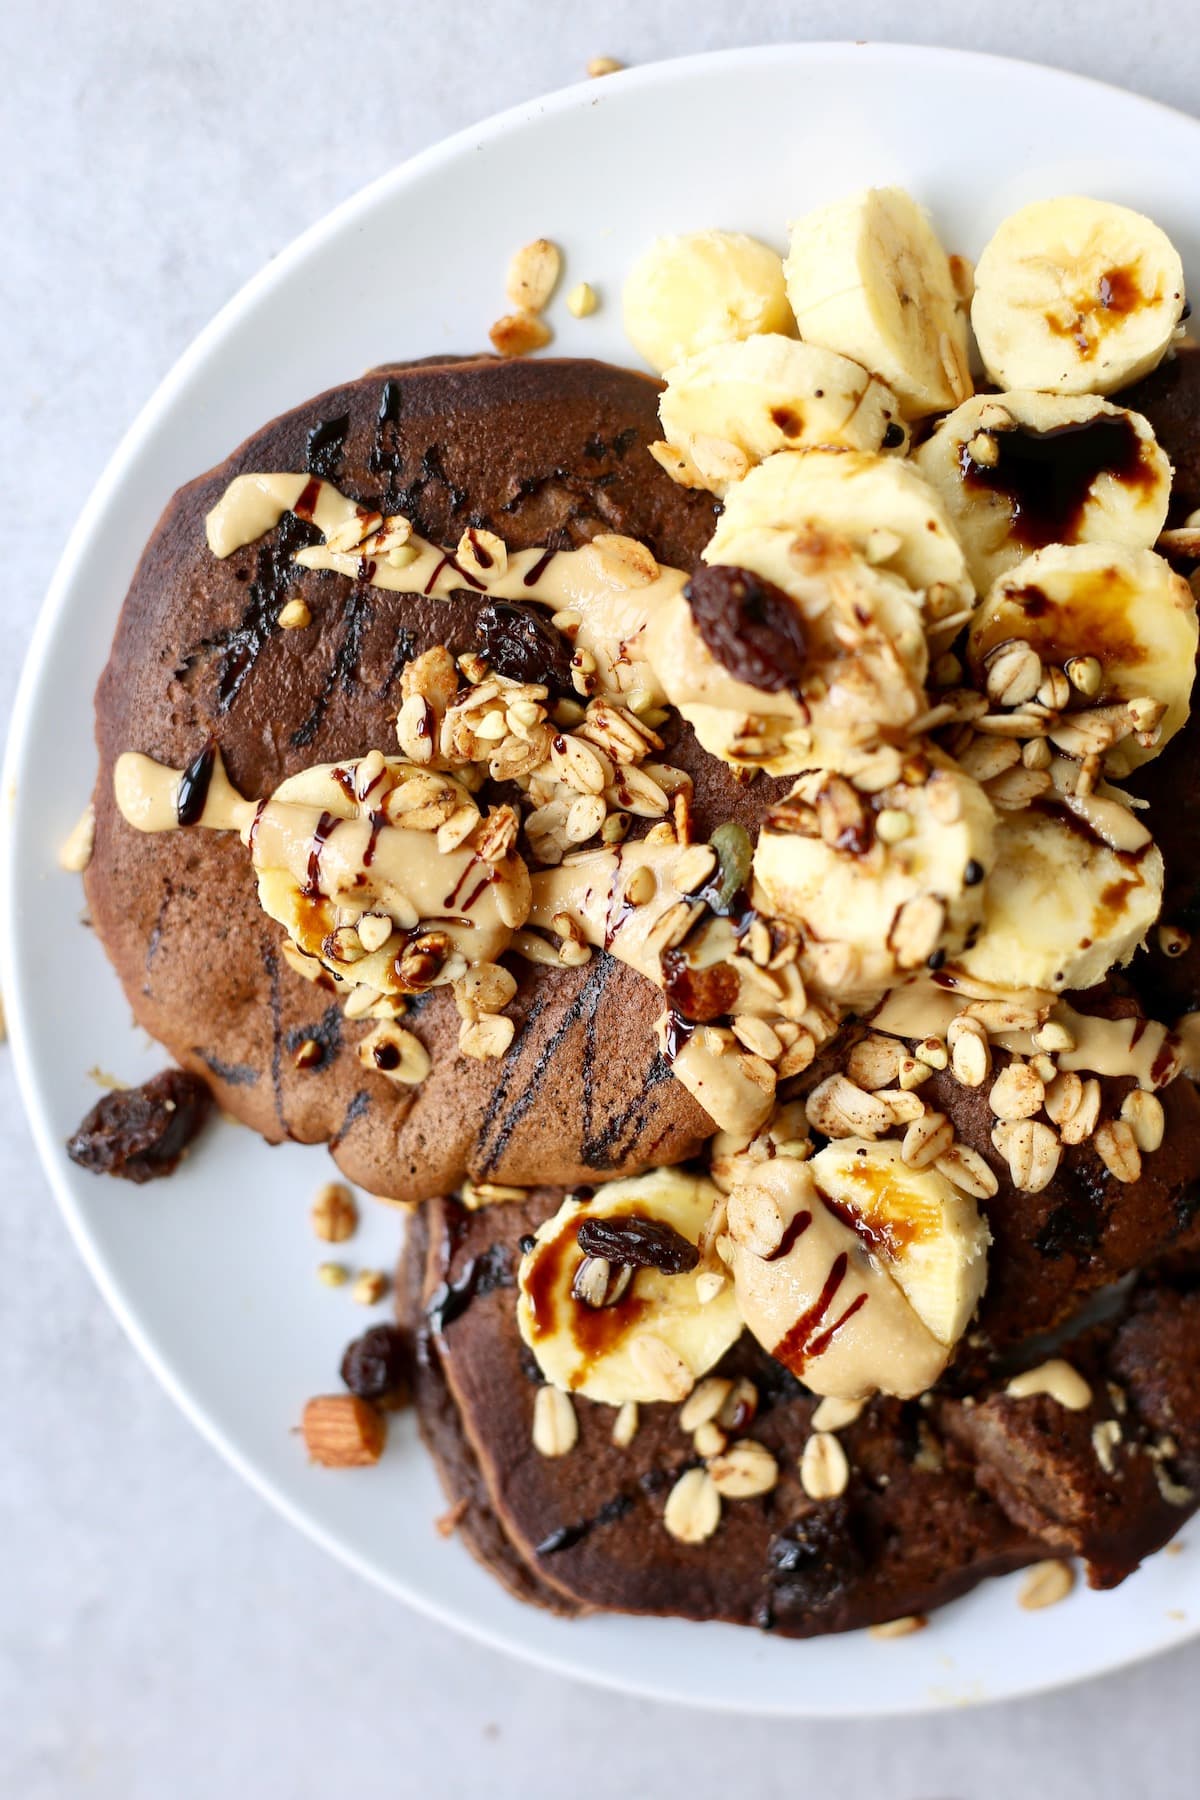 chocolate chickpea flour pancakes on a plate topped with sliced banana, nuts, raisins, granola chocolate syrup and nut butter